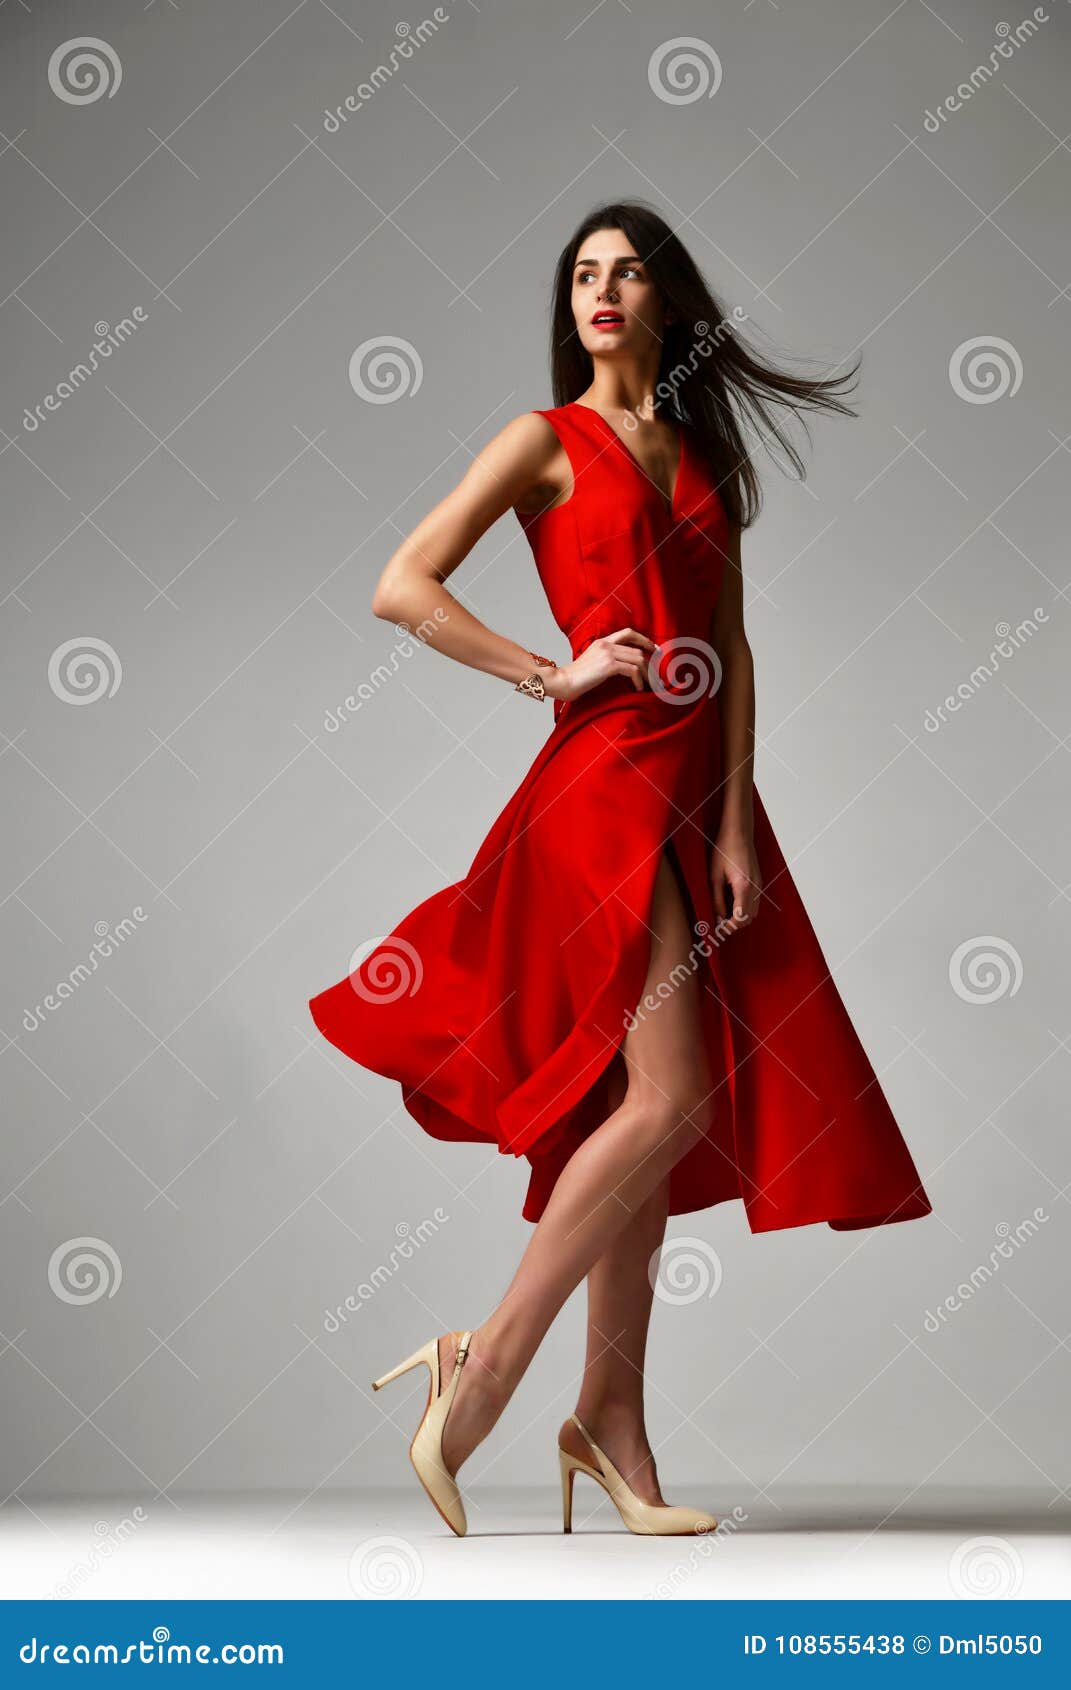 Formal Red Dress Stiletto Heels Shoes 